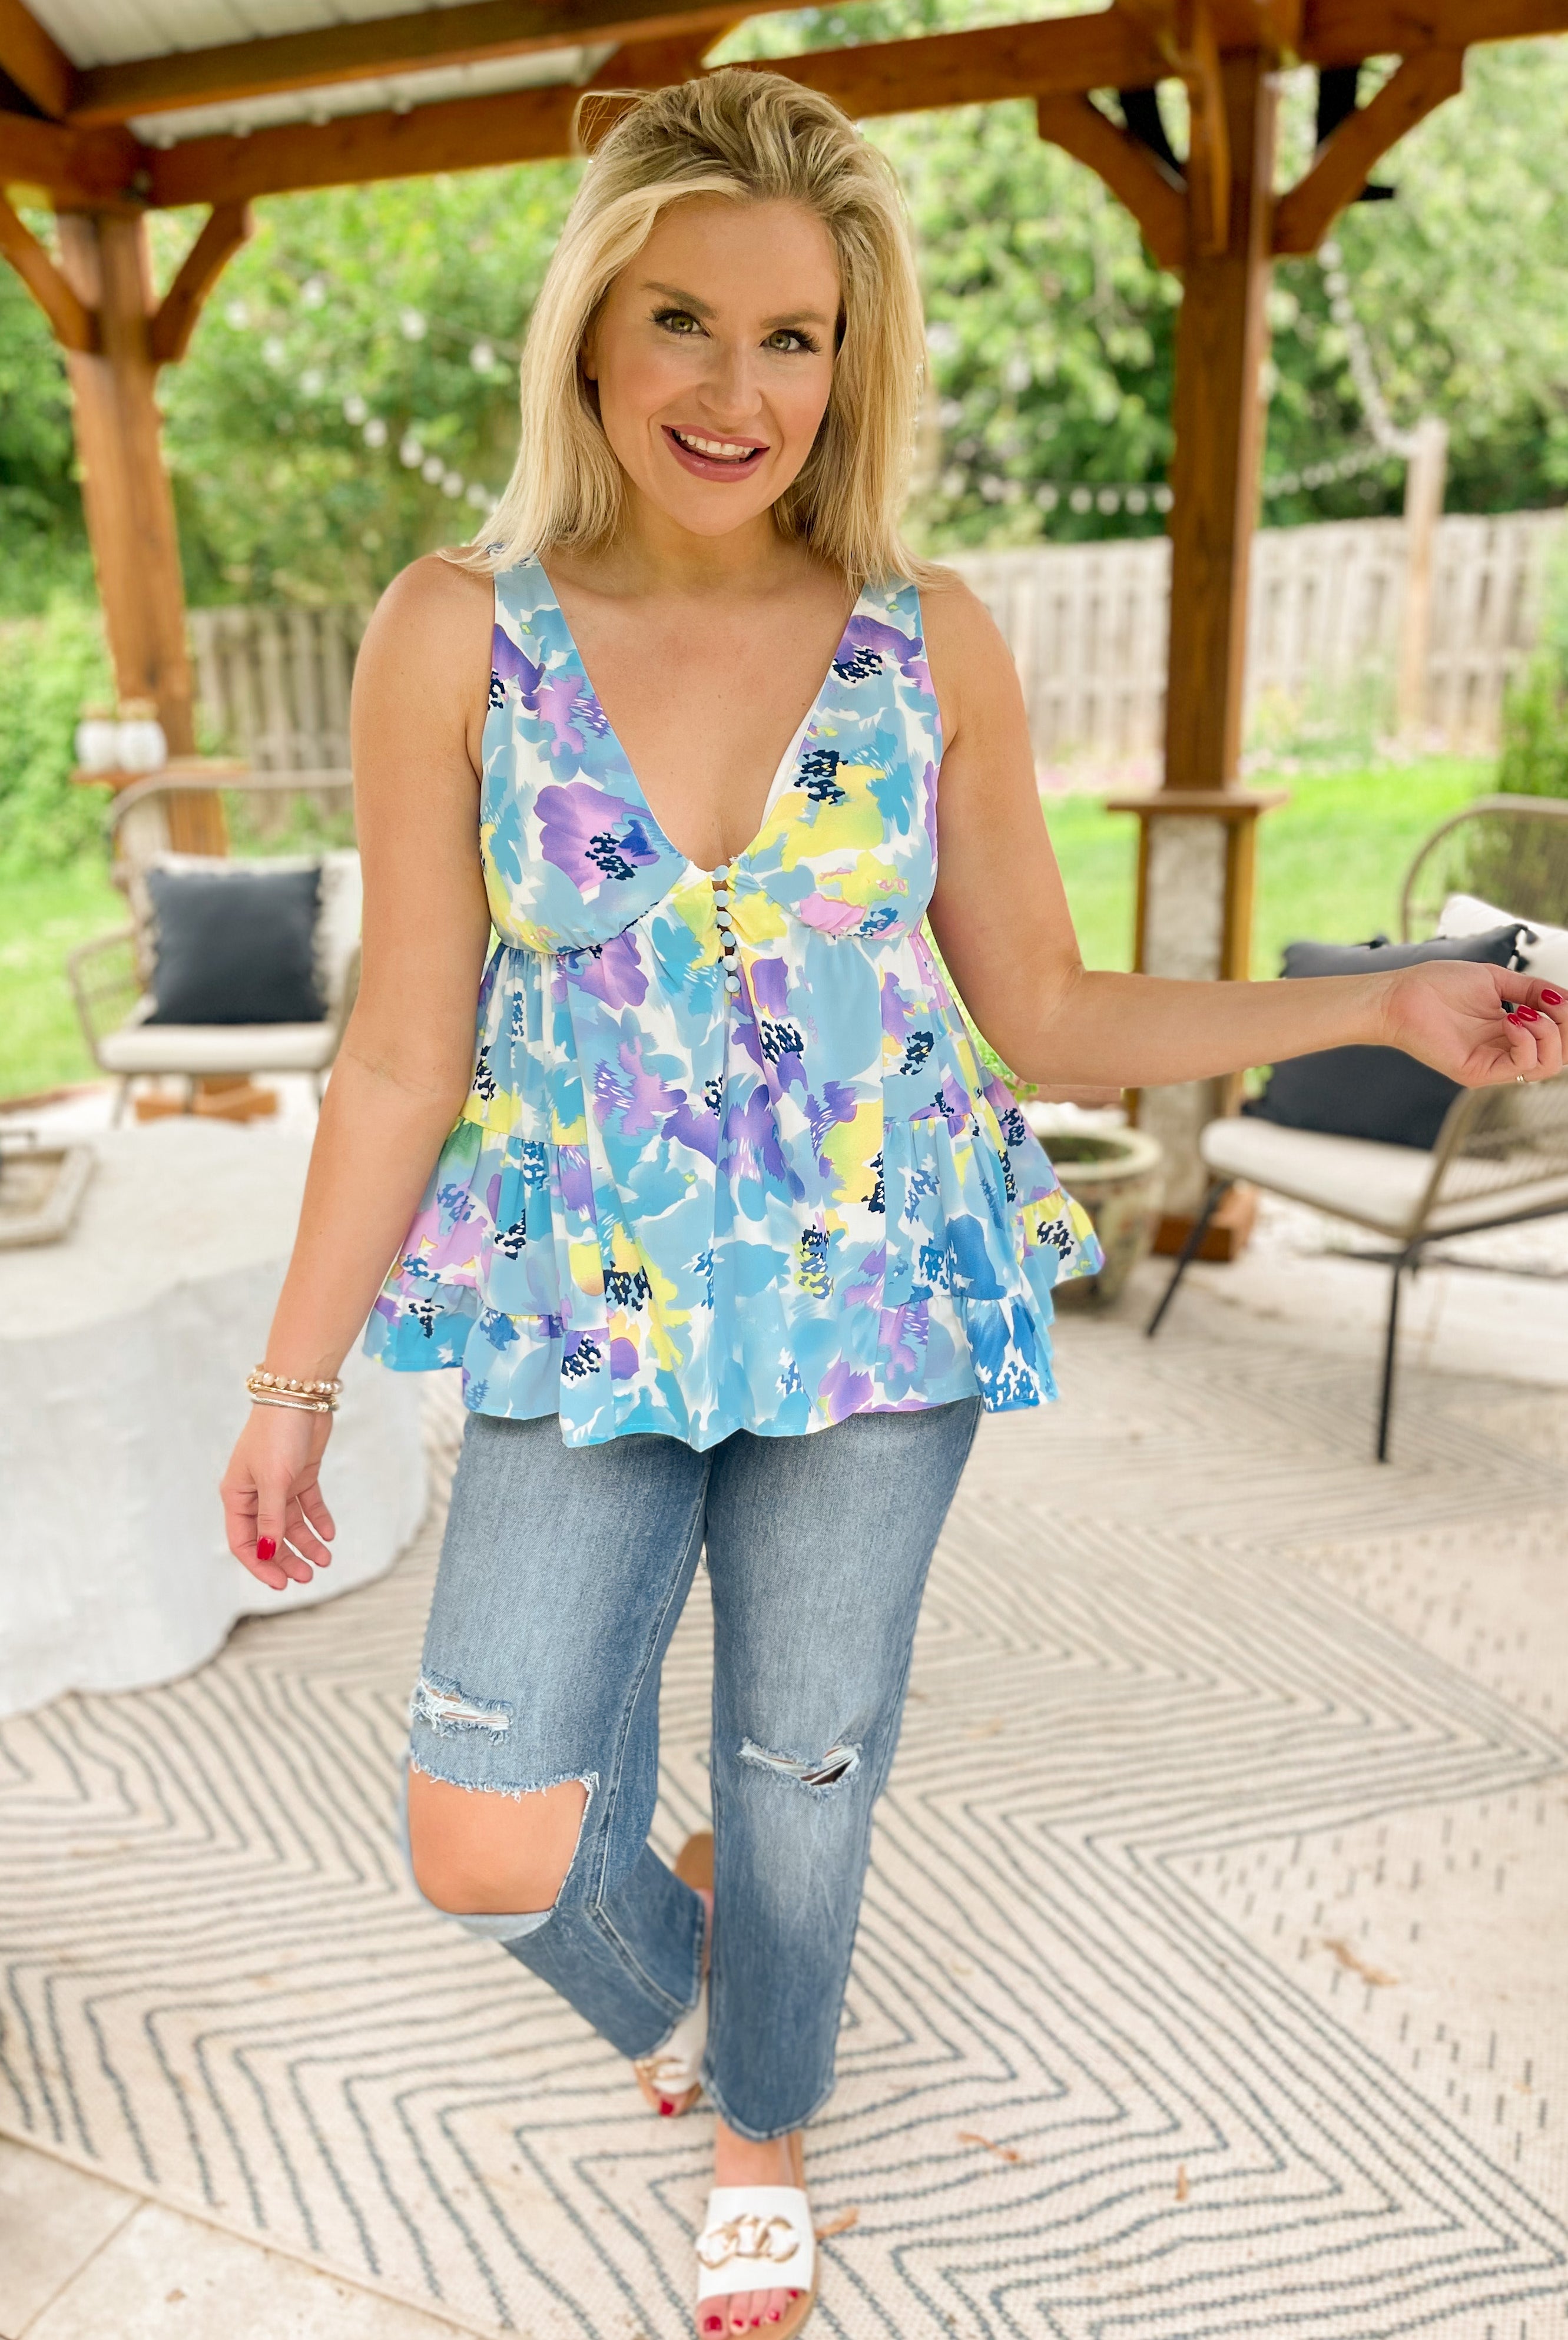 Nichole Floral Print Sleeveless Top - Be You Boutique